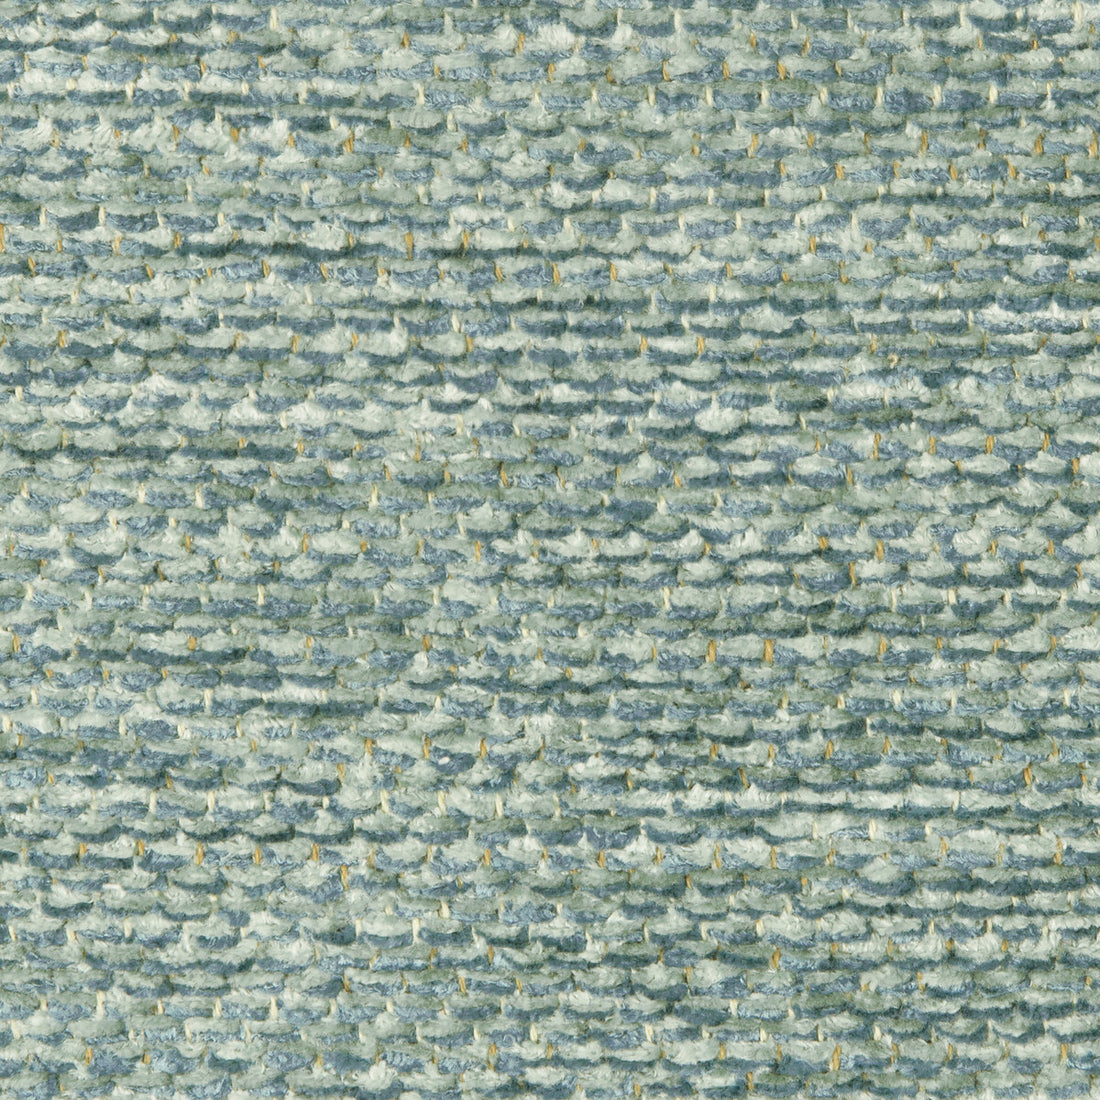 Chamoux Texture fabric in lagoon color - pattern 8019145.35.0 - by Brunschwig &amp; Fils in the Chambery Textures II collection